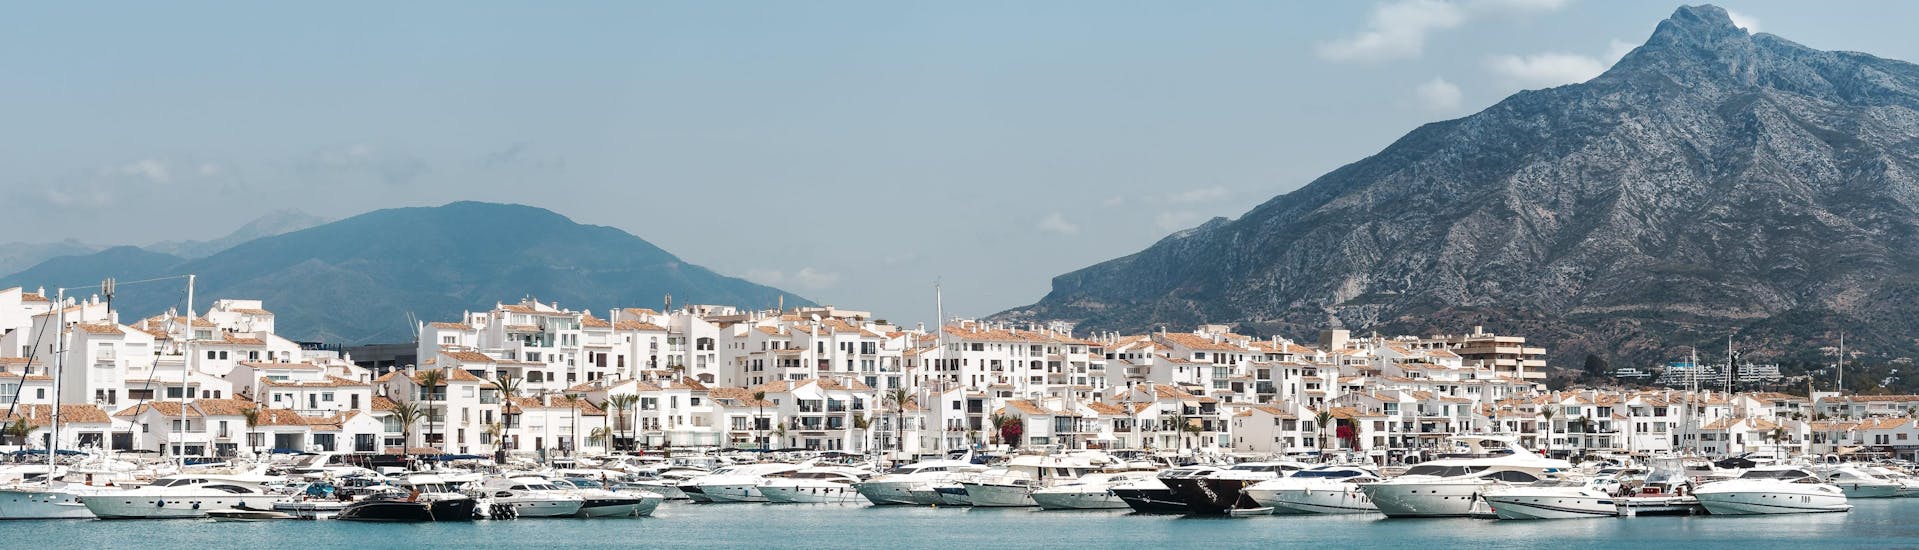 View of Puerto Banus, a departure point for boat trips in Costa del Sol.